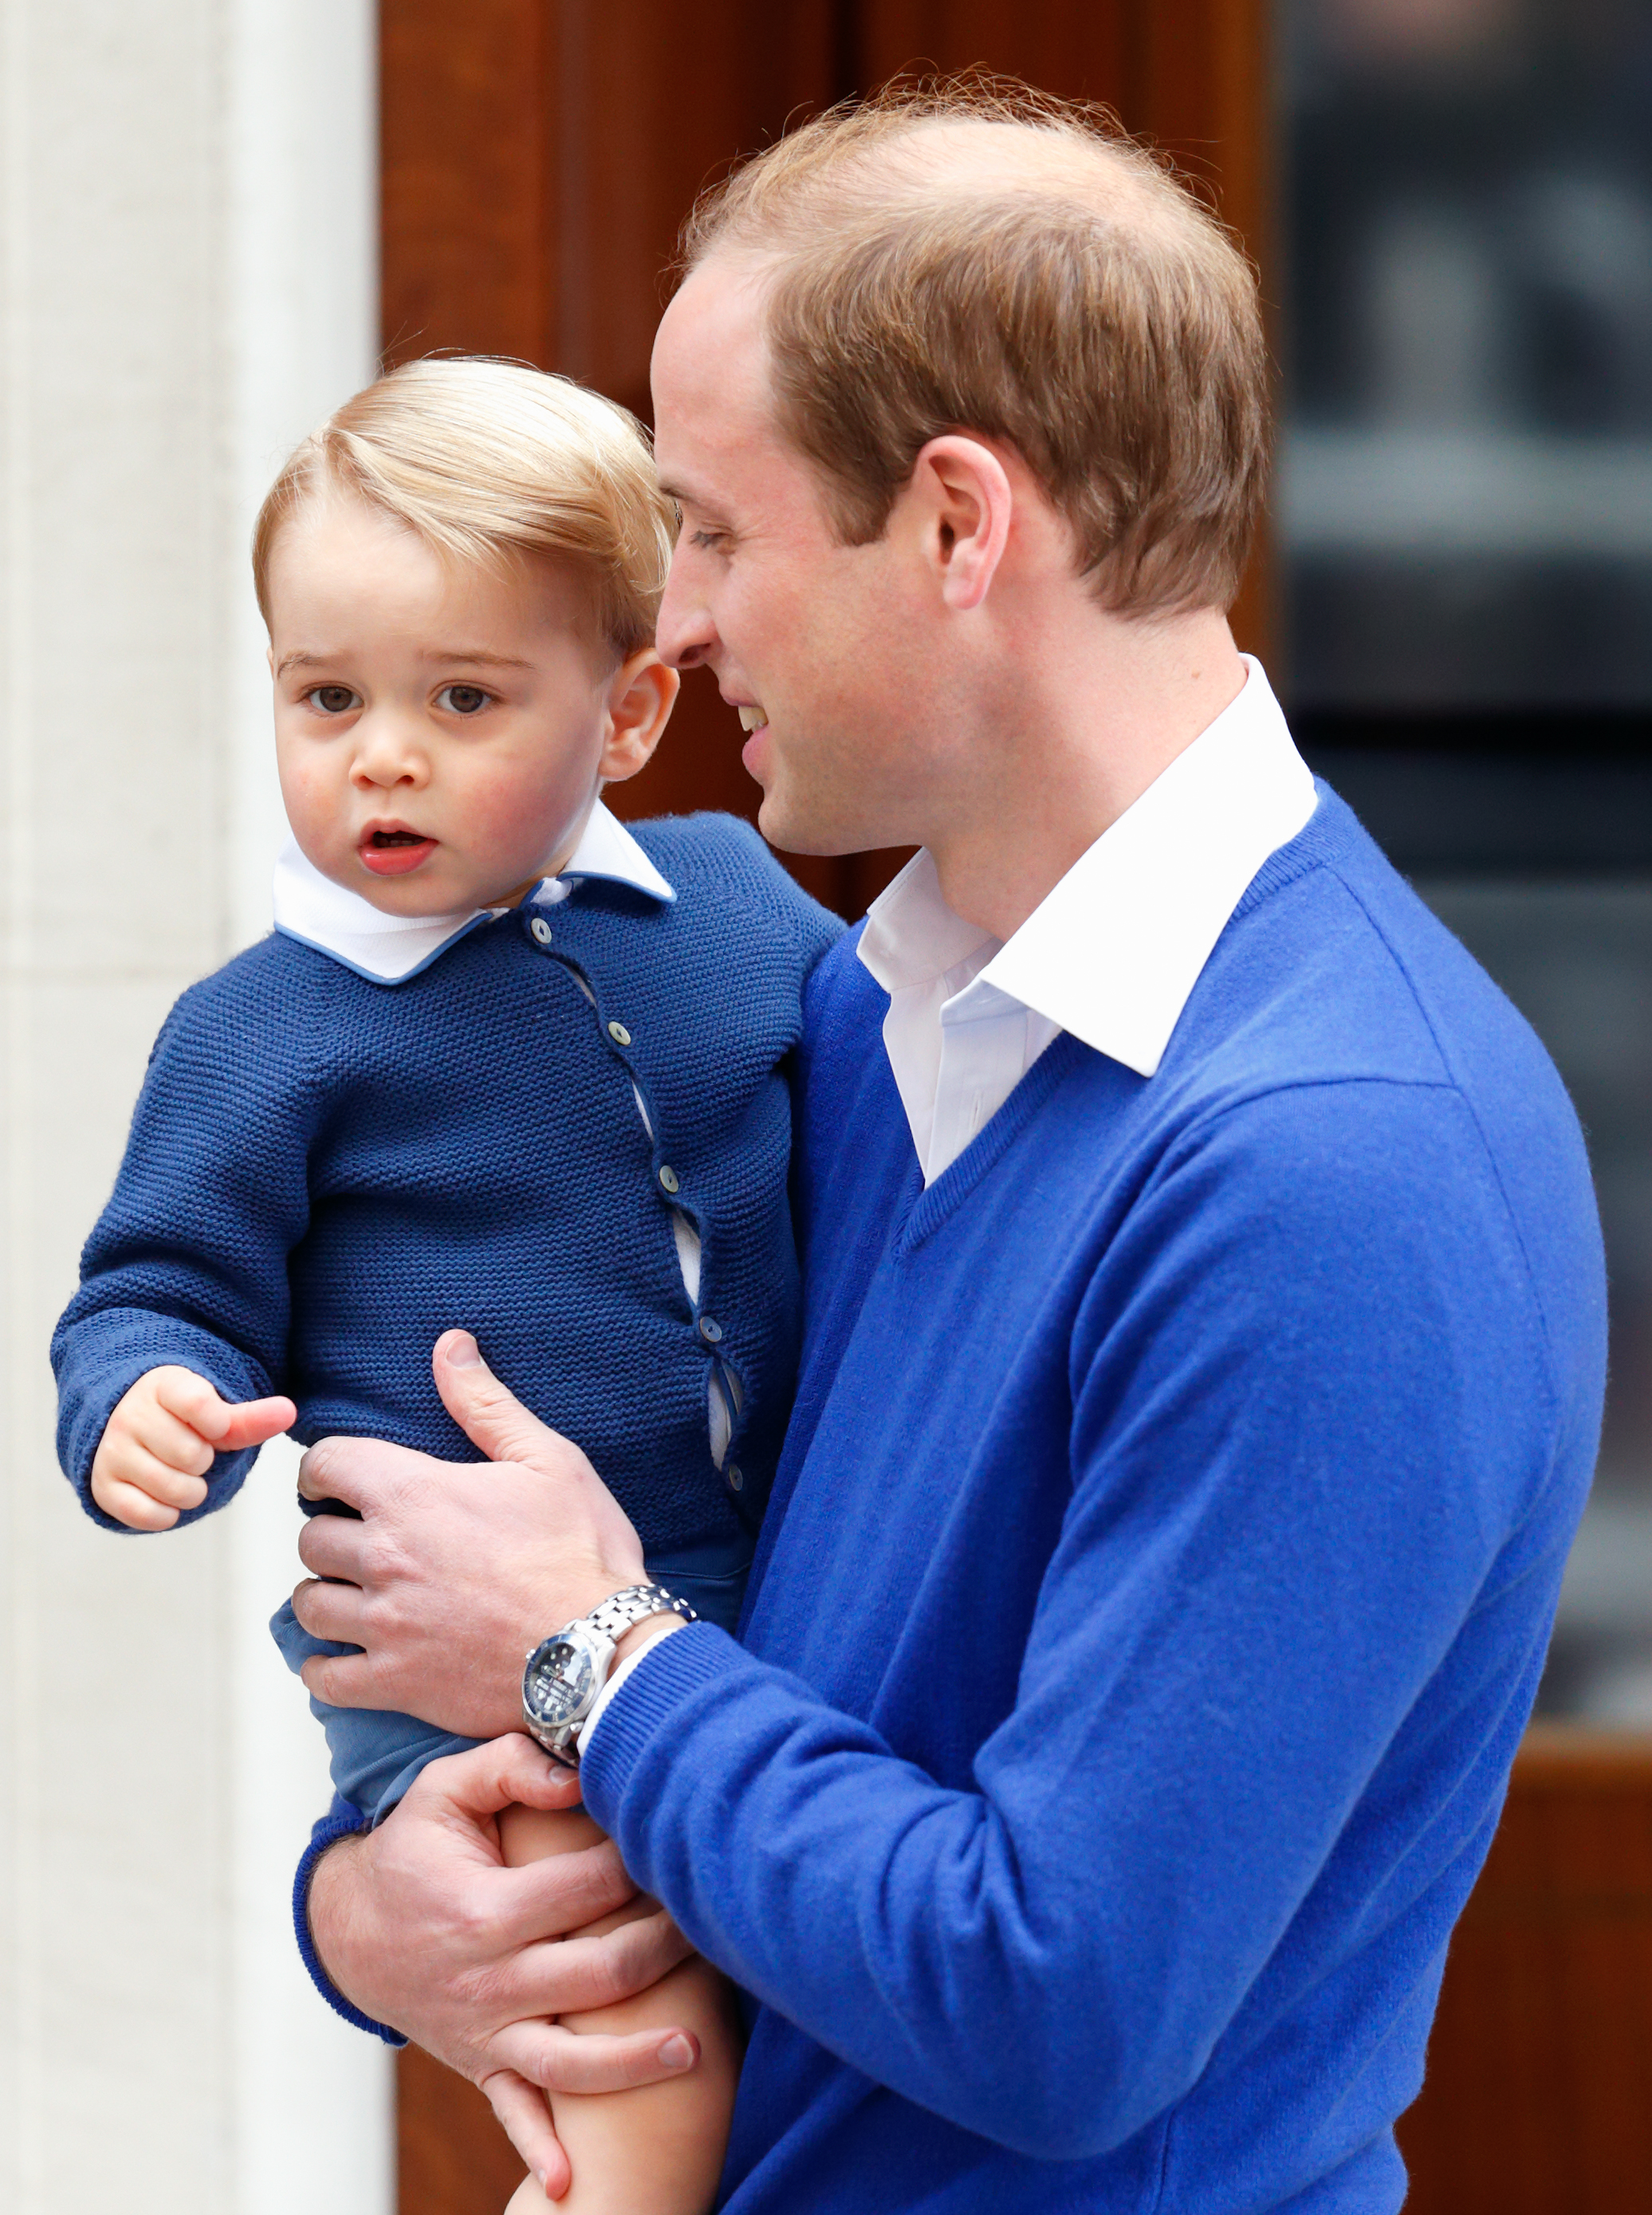 Prince George and Prince William arrive at the Lindo Wing after Princess Catherine gave birth to Princess Charlotte at St Mary's Hospital on May 2, 2015 in London, England | Source: Getty Images